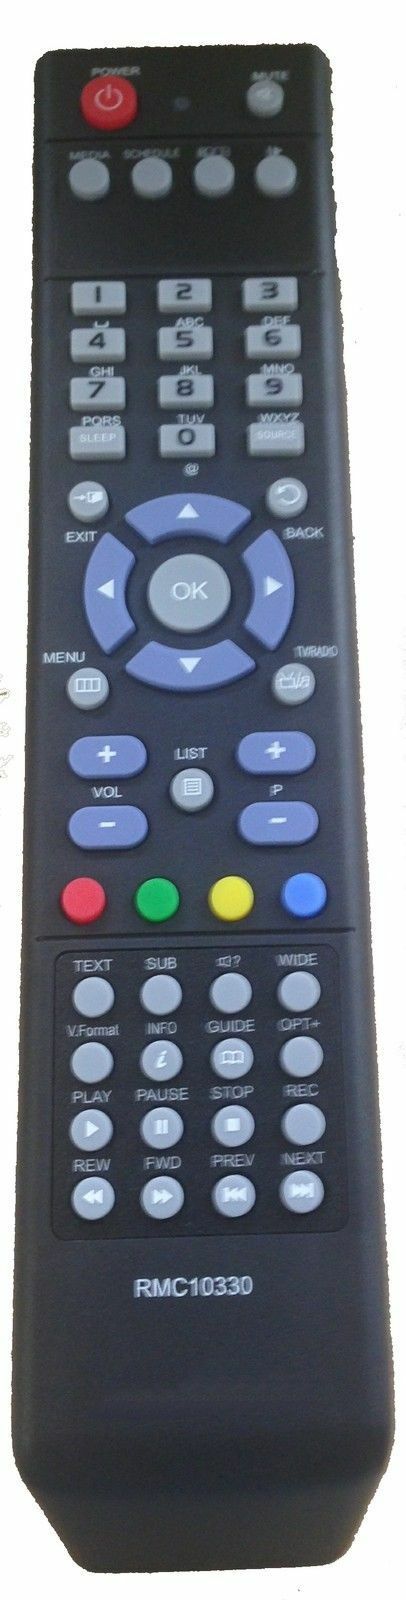 Replacement Remote Control for Skytec 110IR